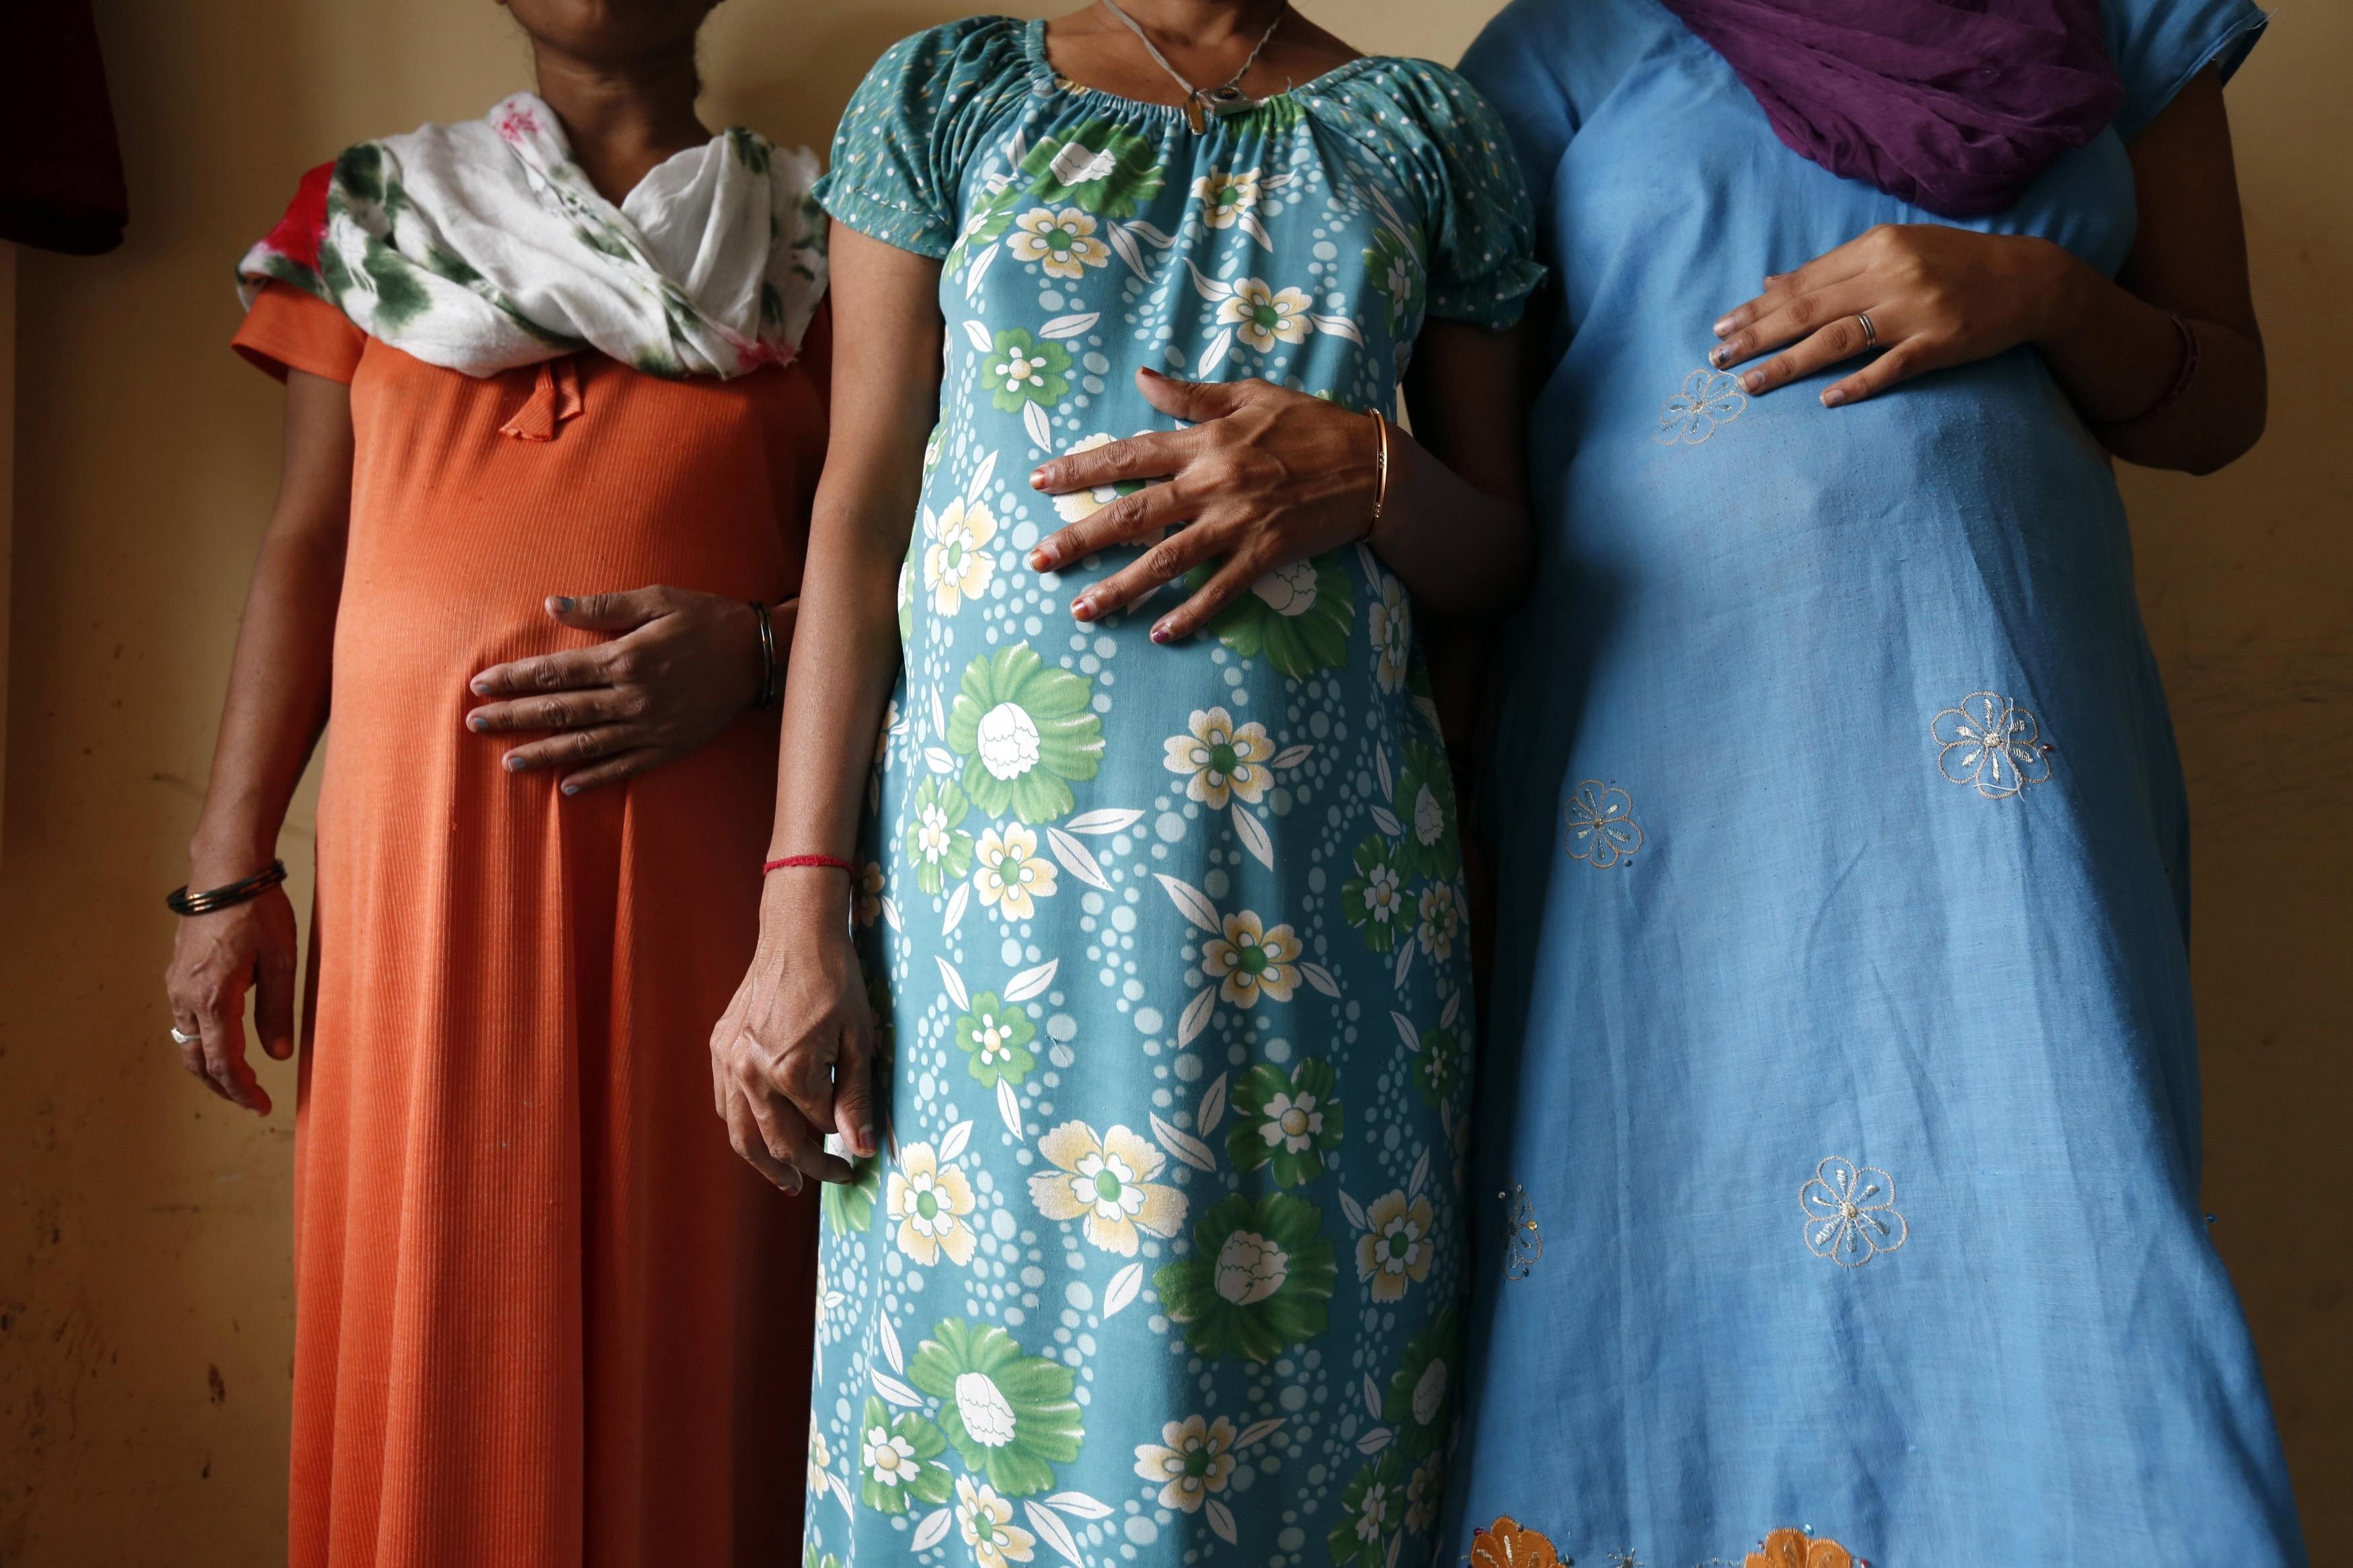 Surrogate mothers at a temporary home in Anand town. A strict new surrogacy bills proposes to tighten the rules around surrogacy. Photo: reuters